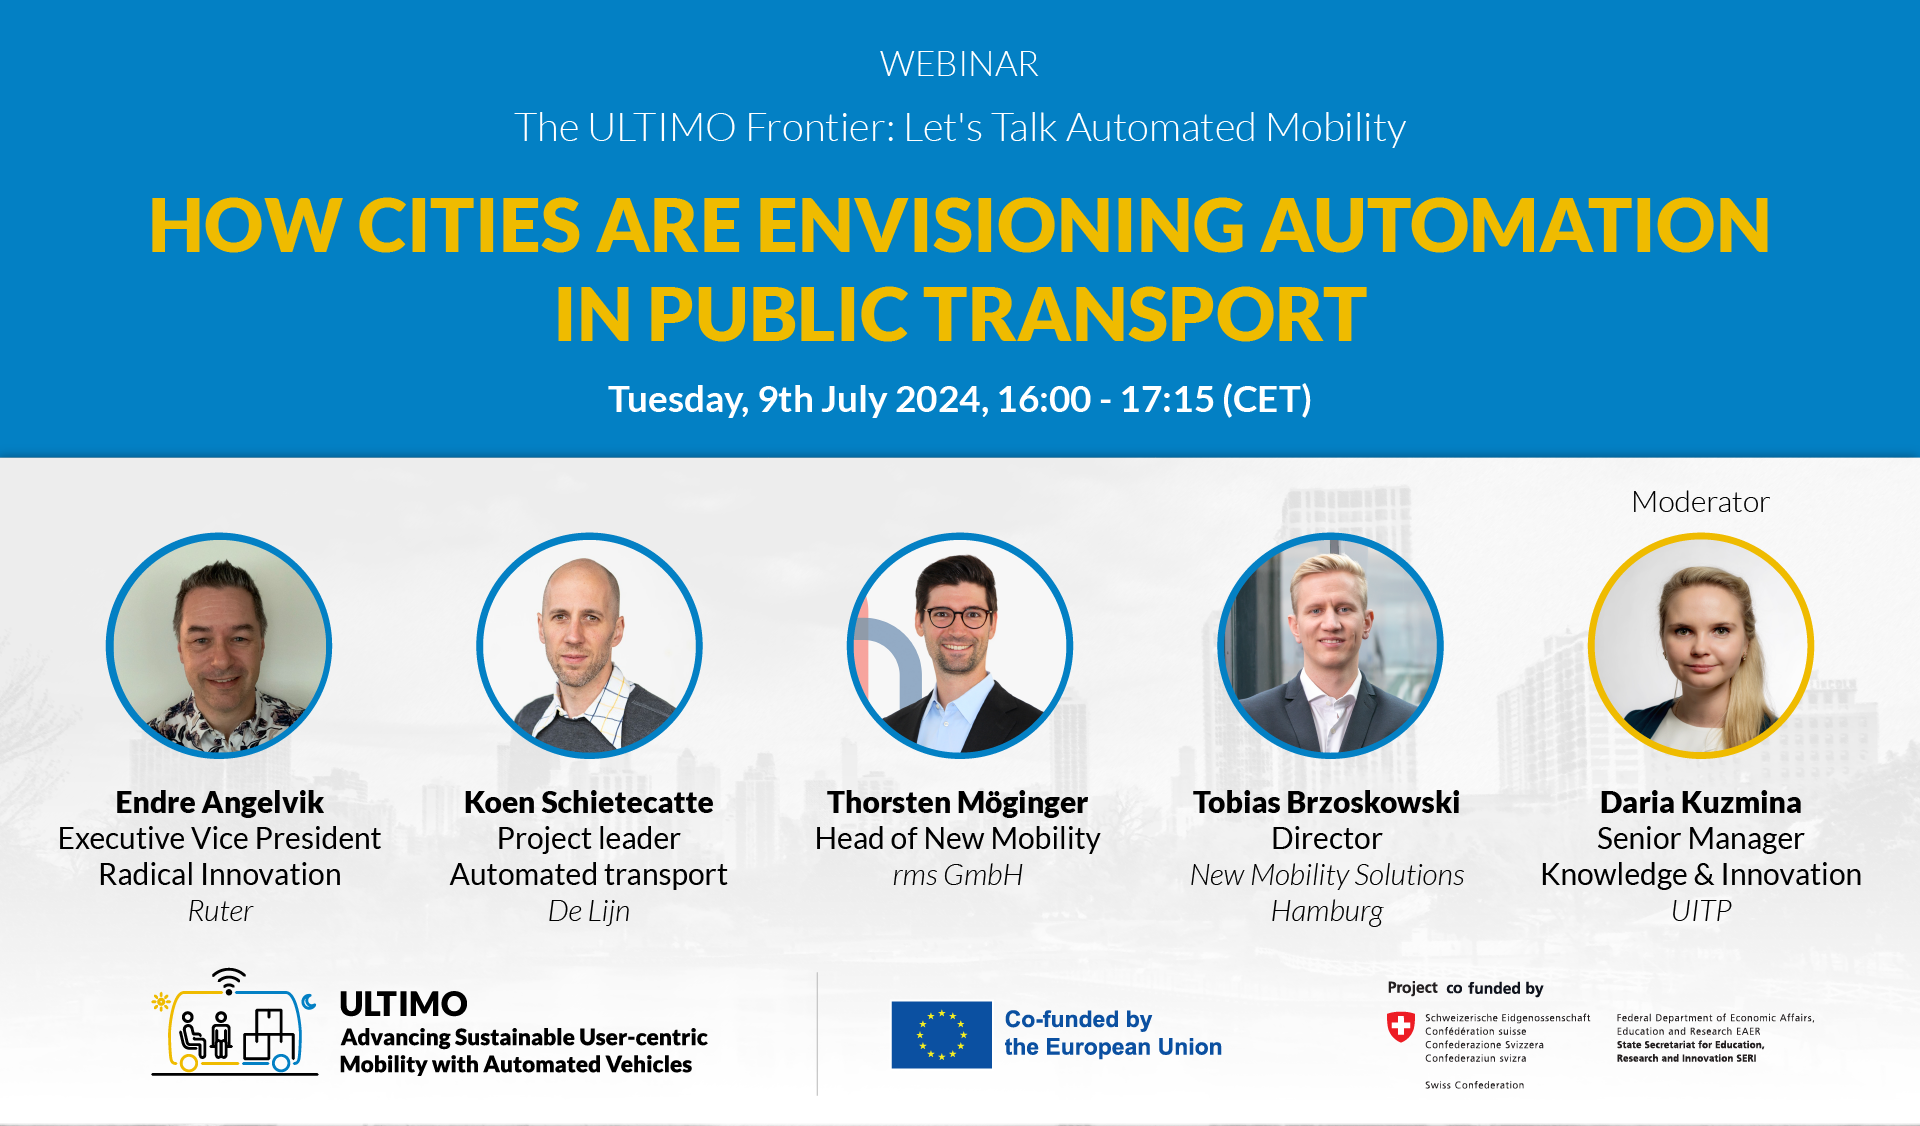 ULTIMO launches new webinar series targeting public transport authorities and operators